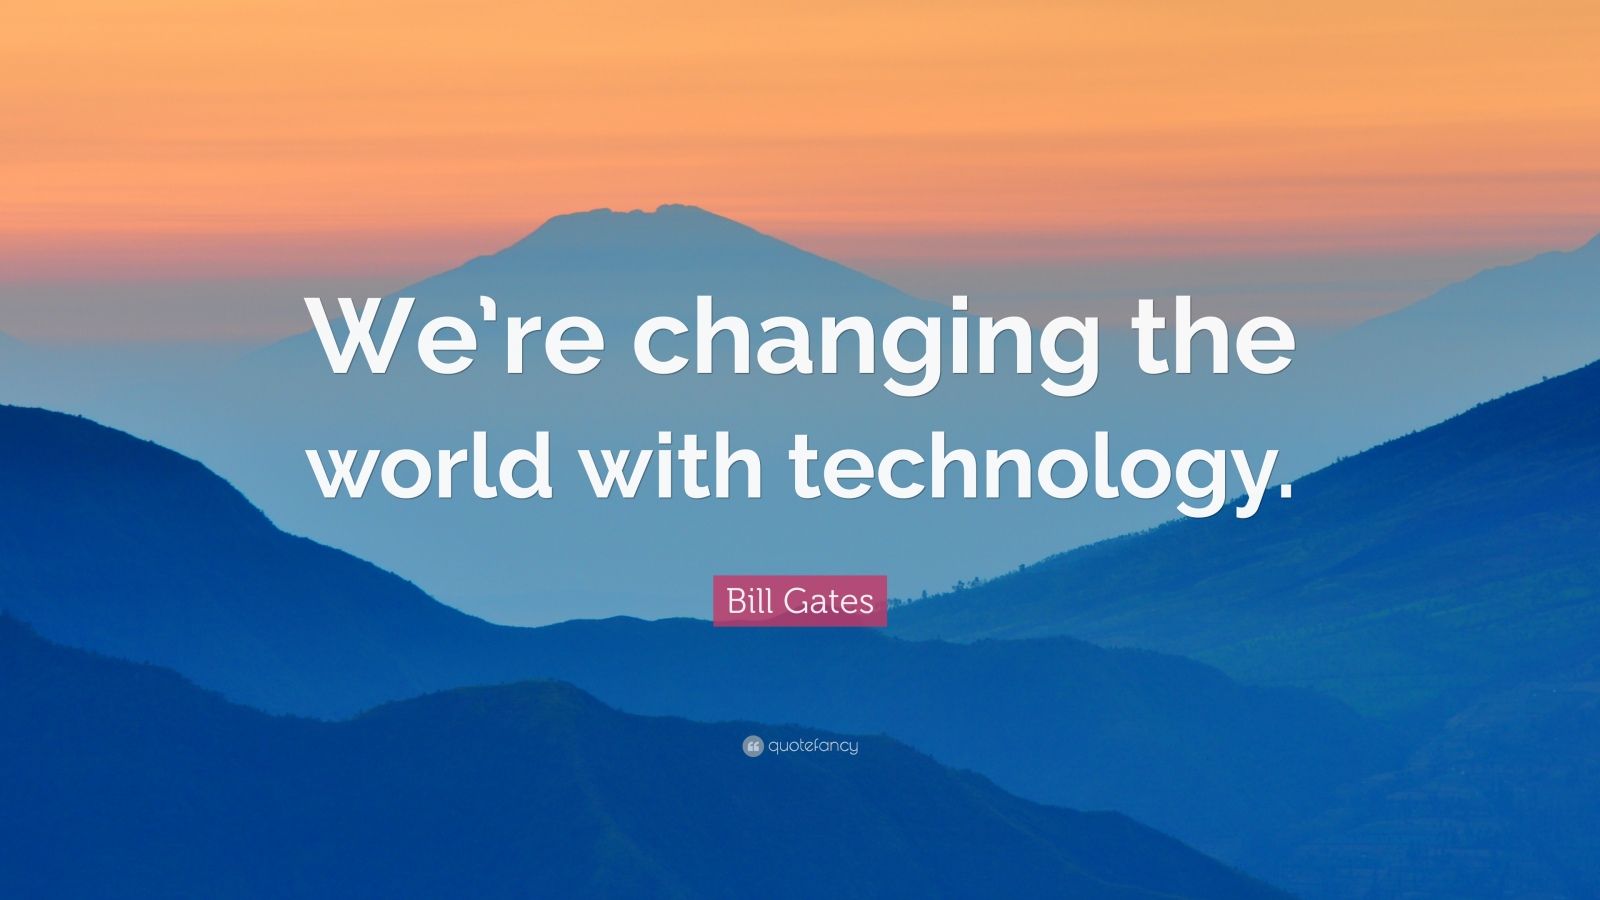 Best Famous Quotes About Technology in the year 2023 The ultimate guide 